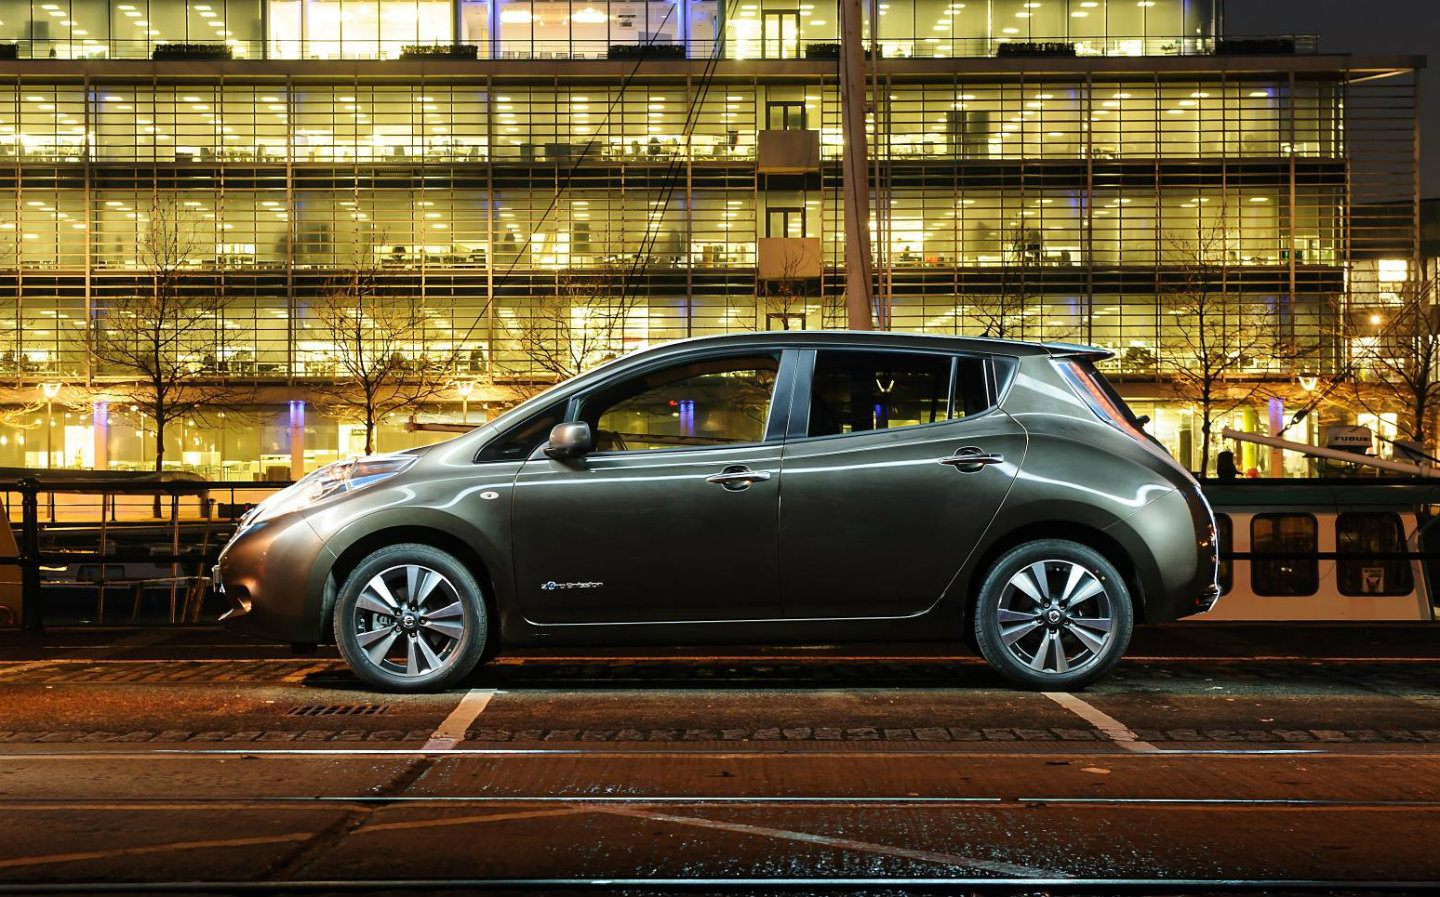 The five best electric cars you’d be happy to drive: Nissan Leaf is a good all-rounder